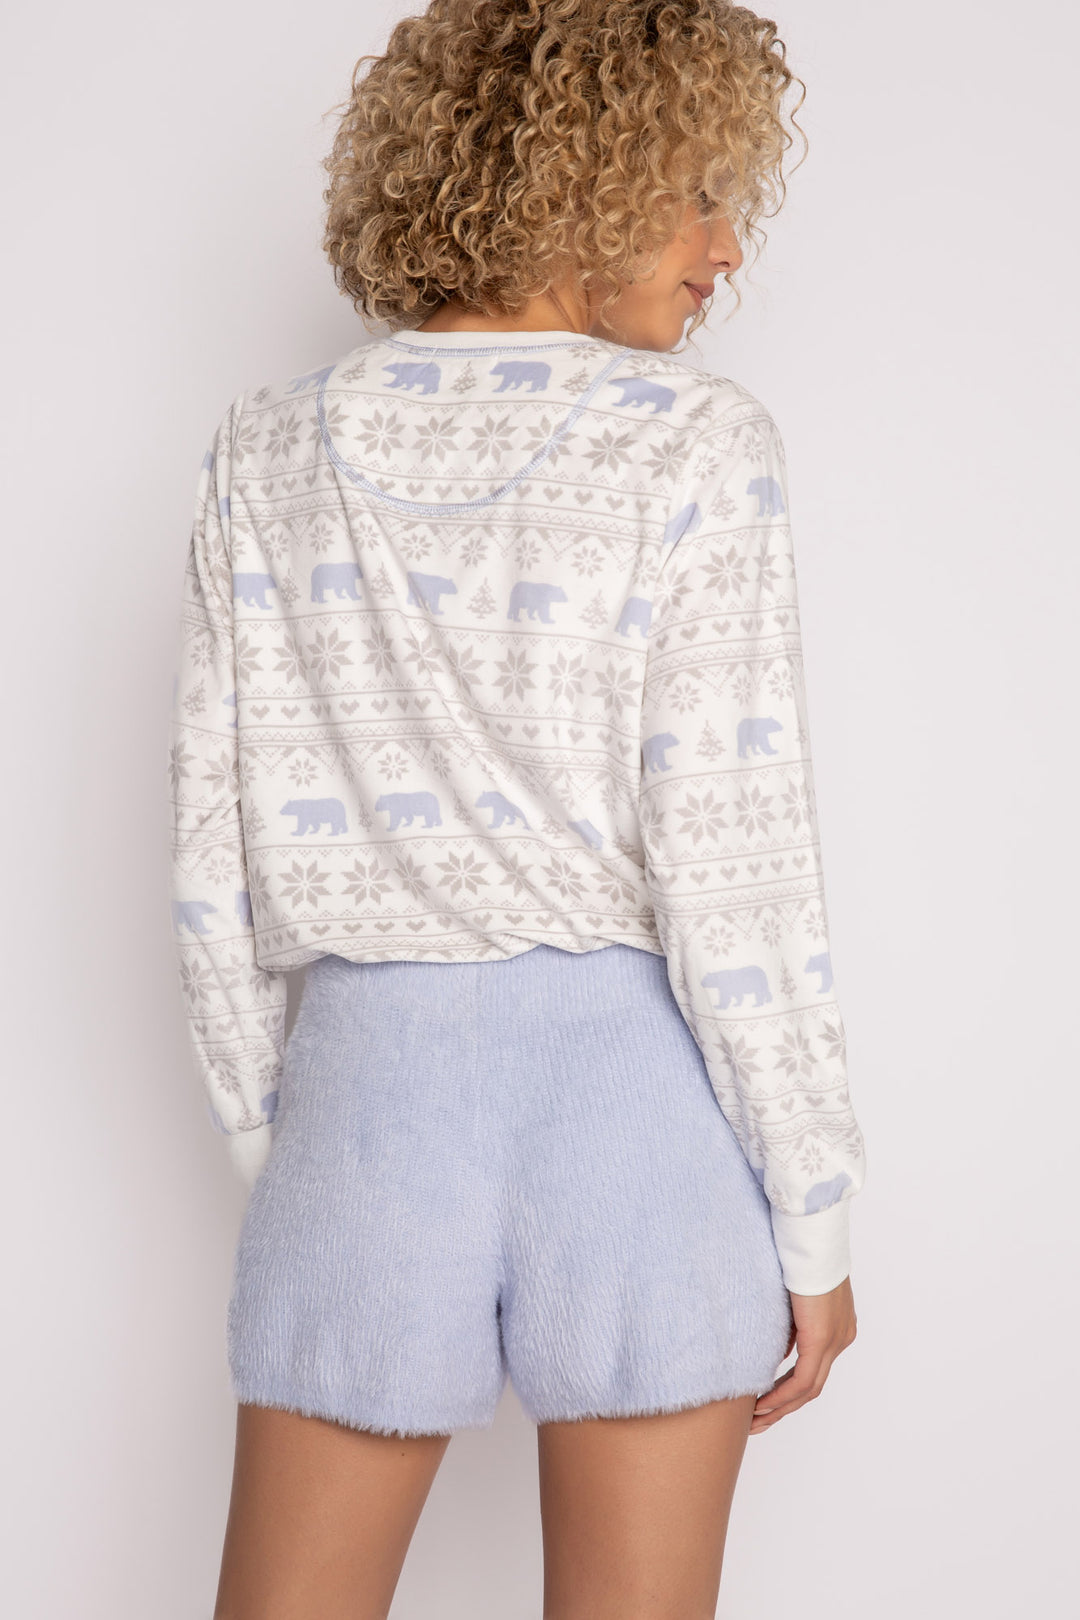 Light blue sweater-knit short with elastic waist, no tie. (7231867781220)